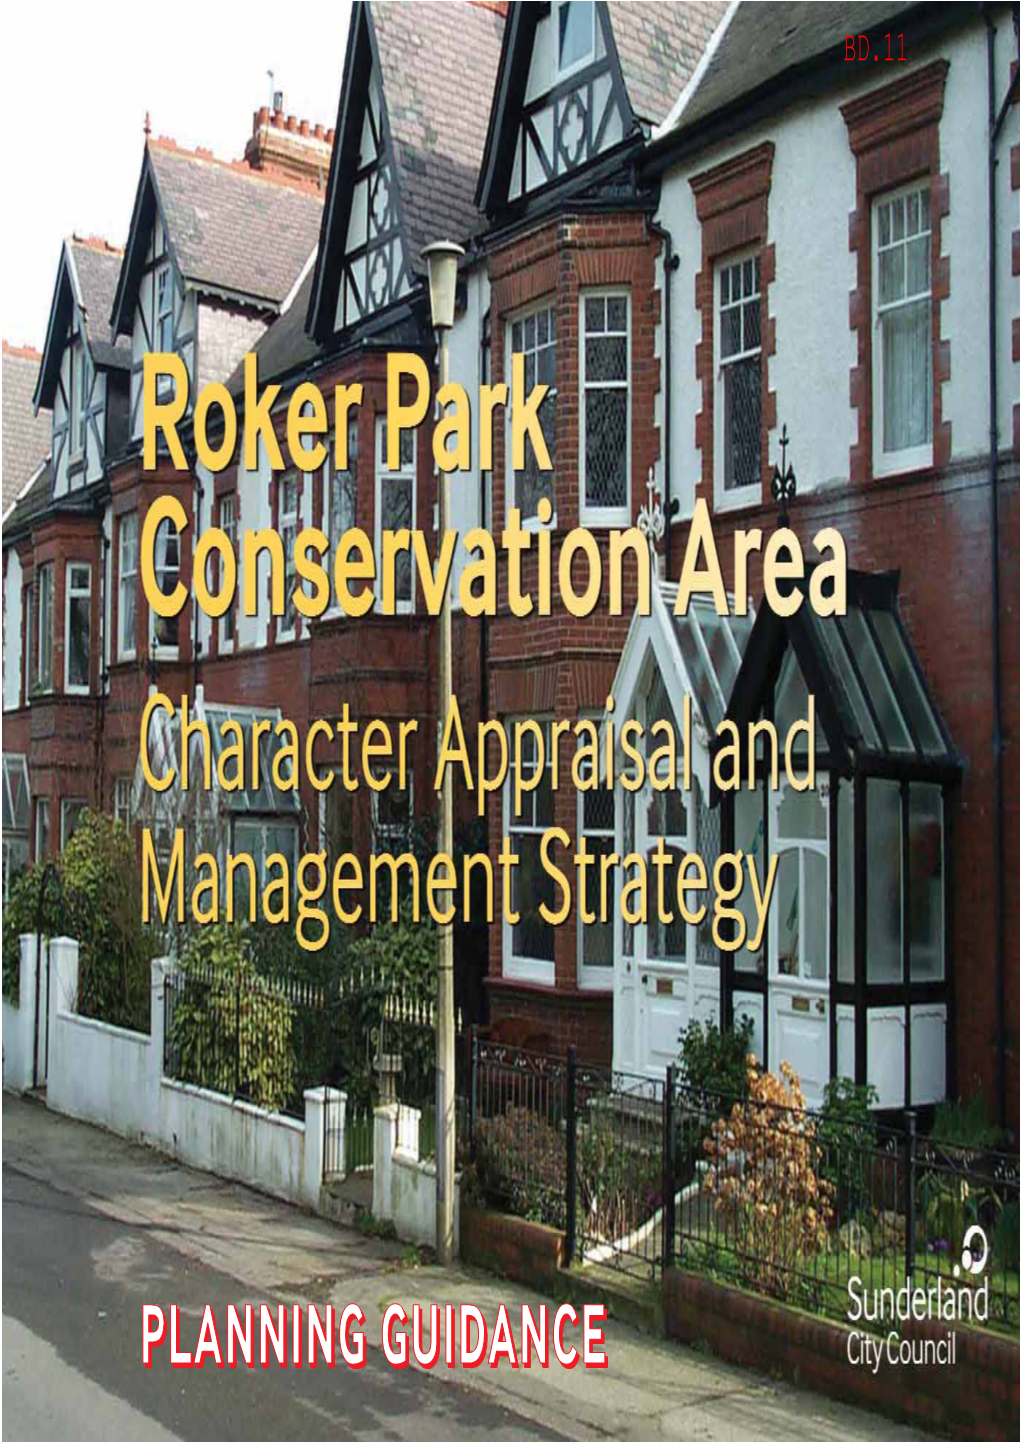 Roker Park Conservation Area Character Appraisal and Management Strategy